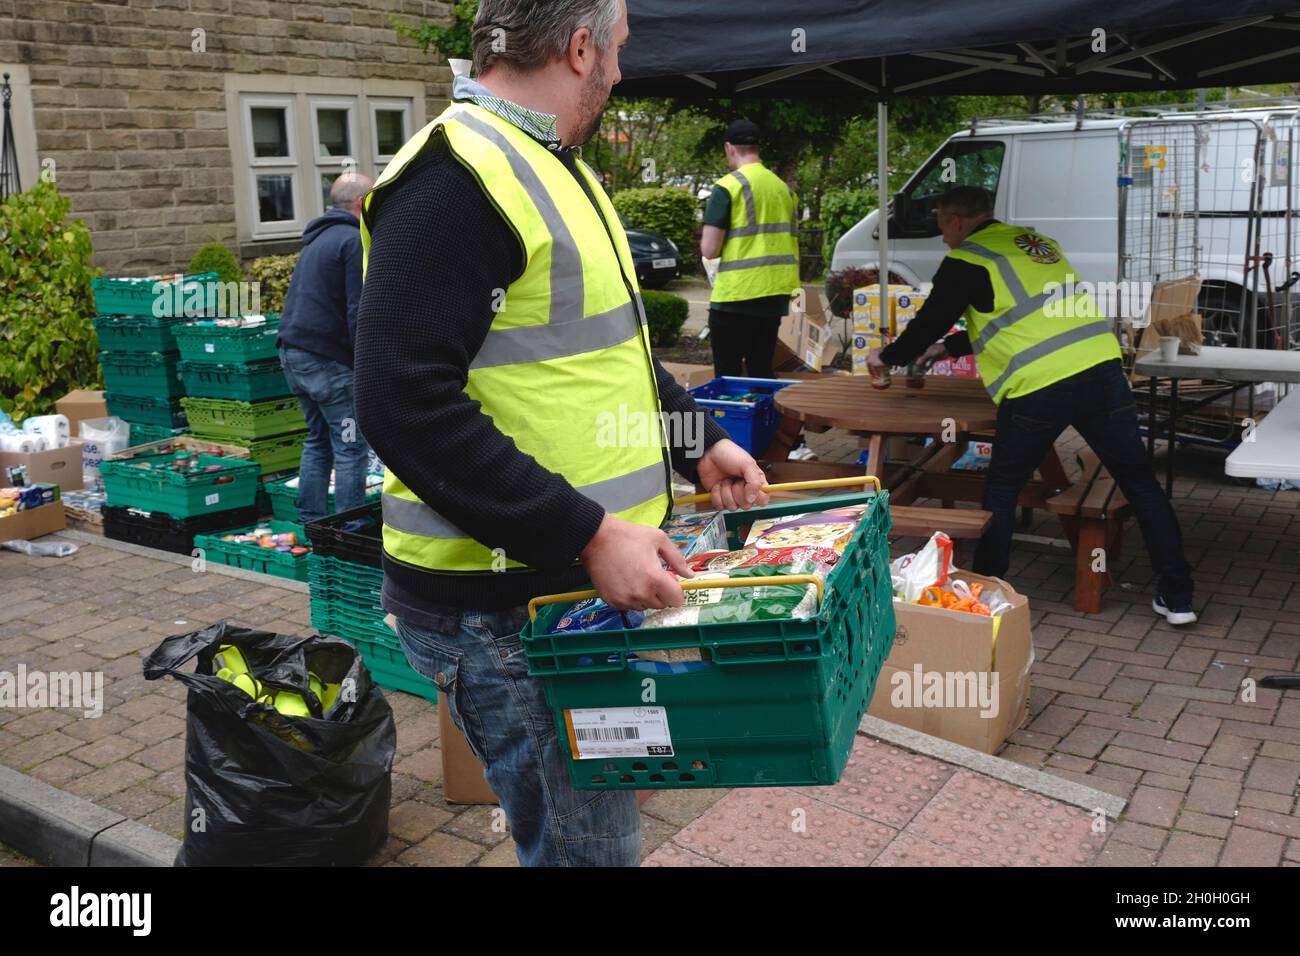 Volunteers from Saddleworth Round Table operate a food drop to support local food banks in Saddleworth, Greater Manchester Stock Photo